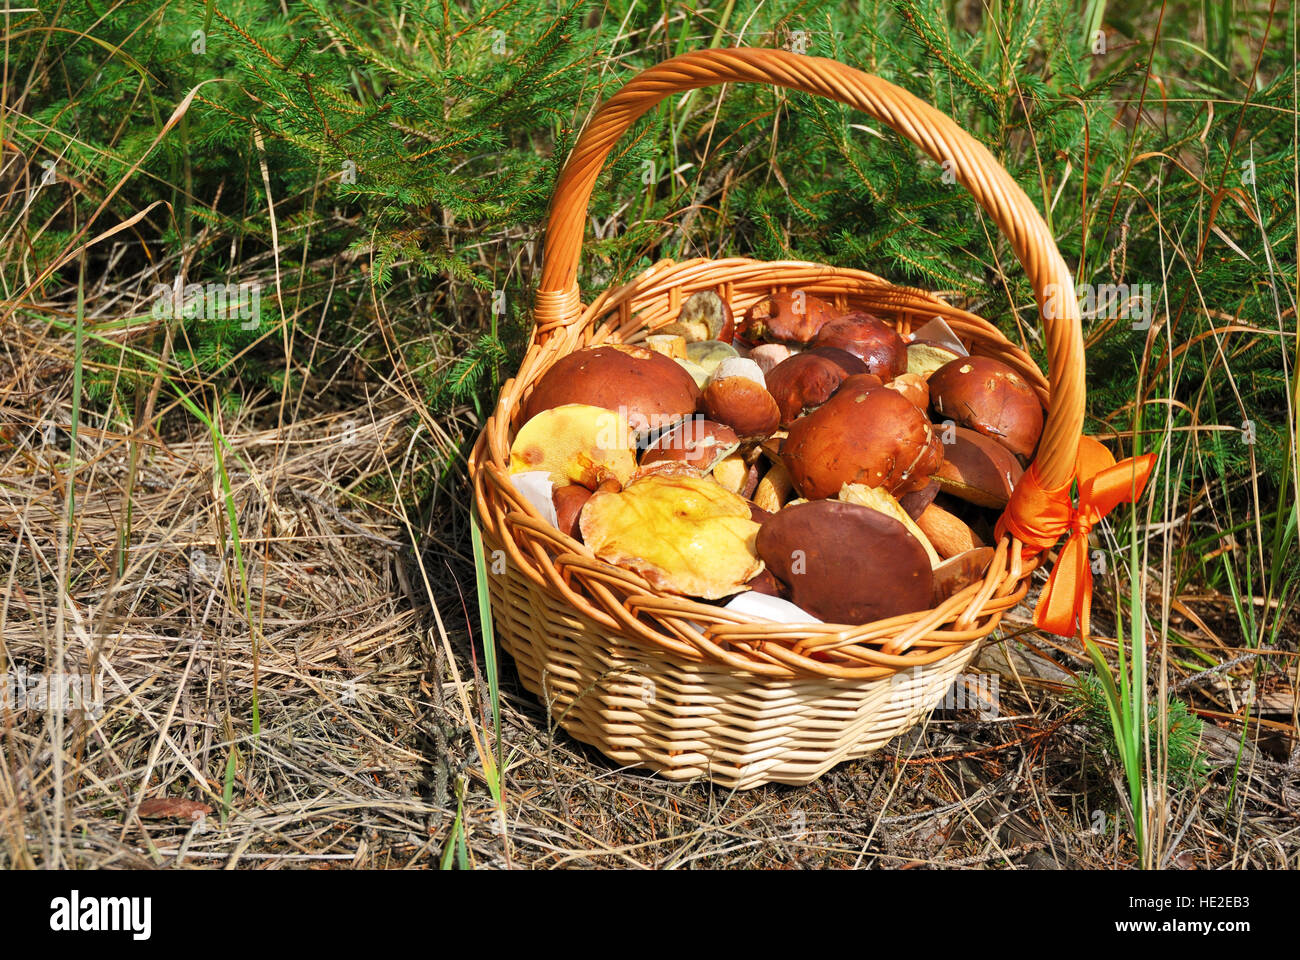 Basket of fresh mushrooms picked in forest Stock Photo